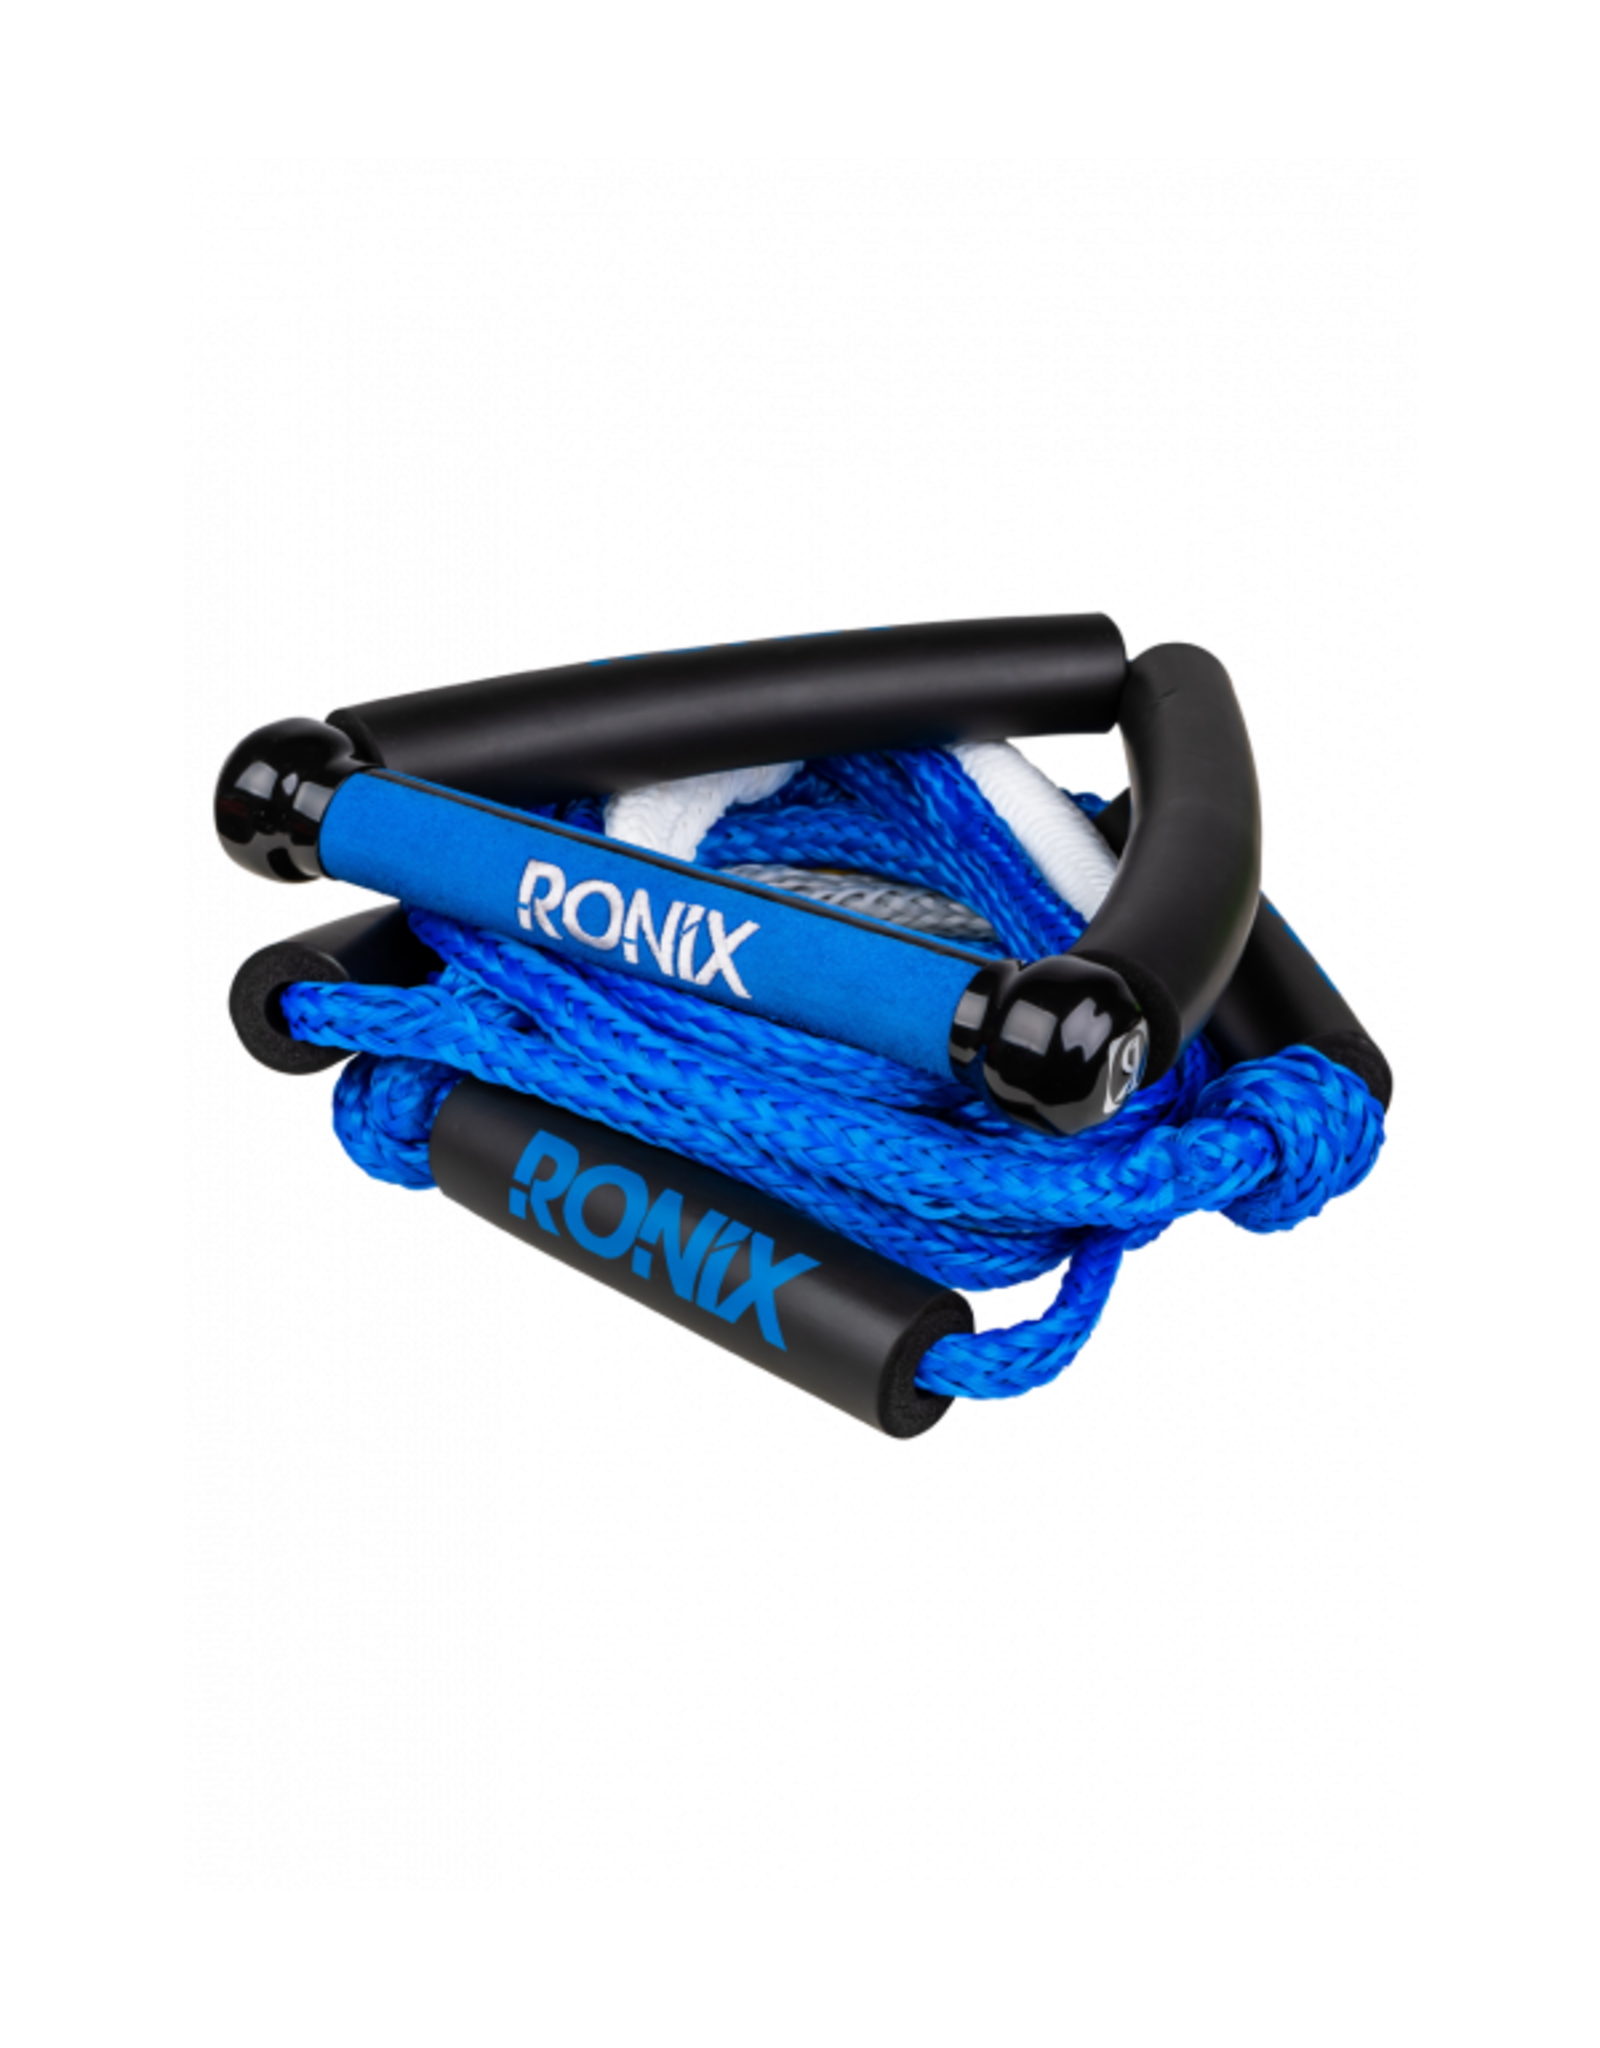 RONIX WAKESURF ROPE RONIX BUNGEE BLUE 10IN HANDLE 25FT LENGTH